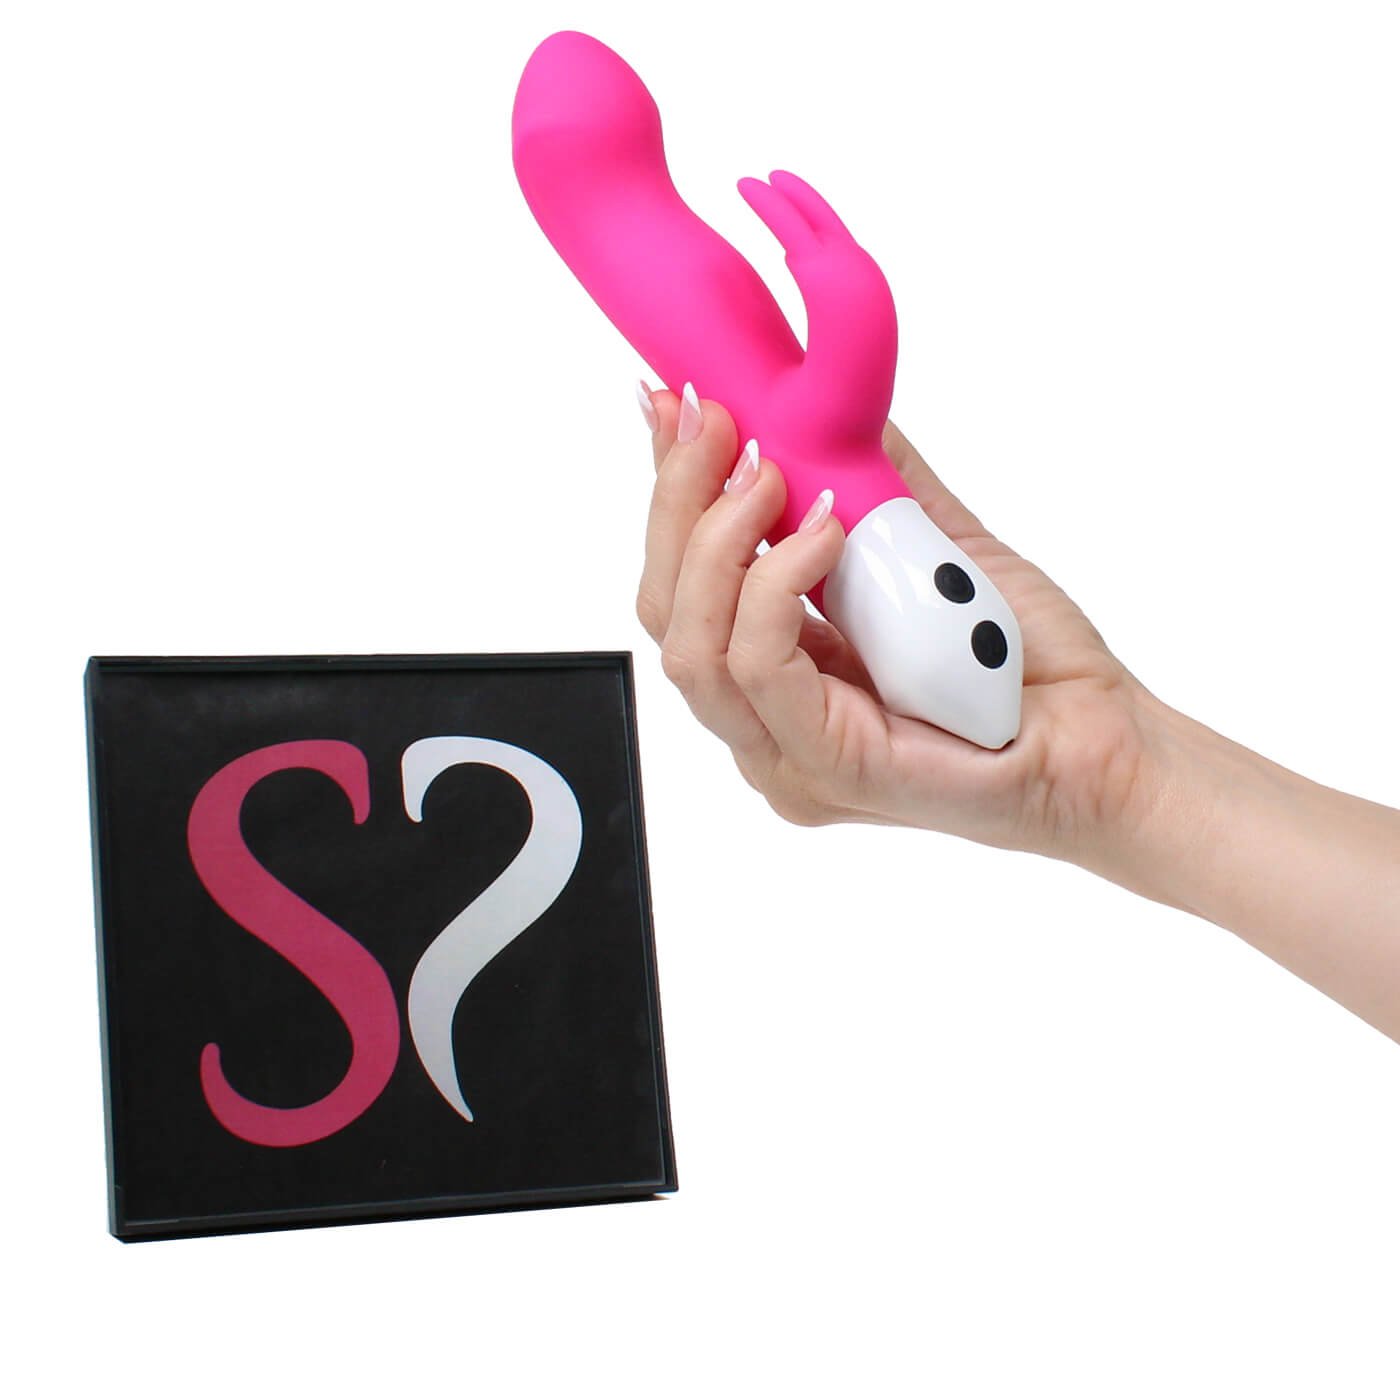 DUALITY Dual Motor Rechargeable 7 Mode Extra Powerful Tapered G-Spot Rabbit Vibrator